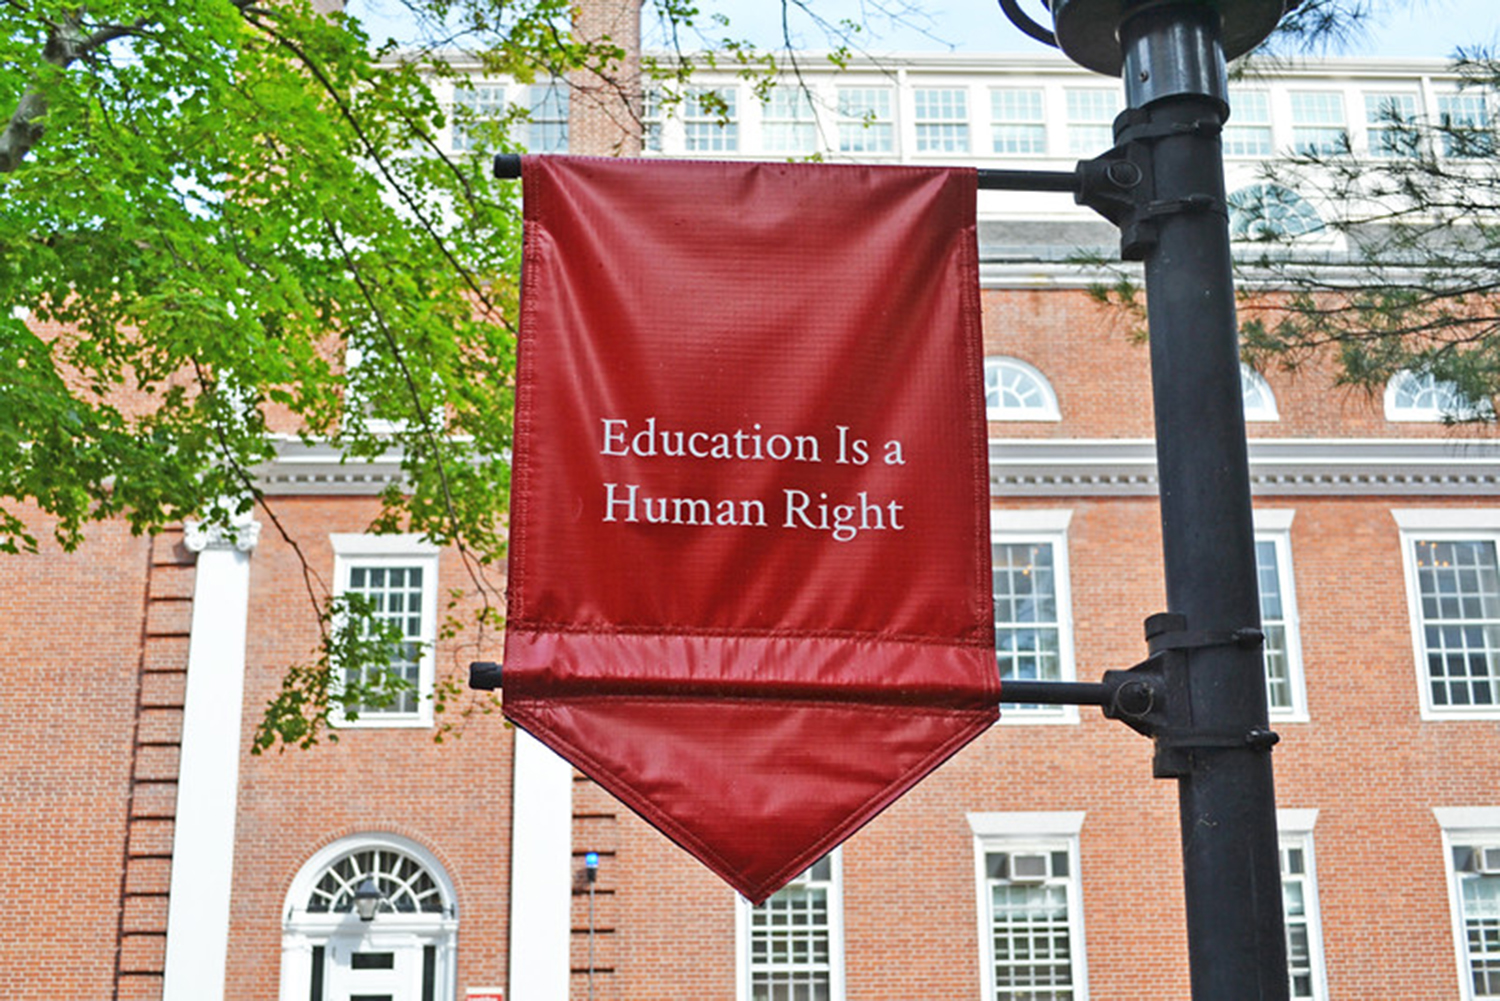 Education is a Human Right Sign